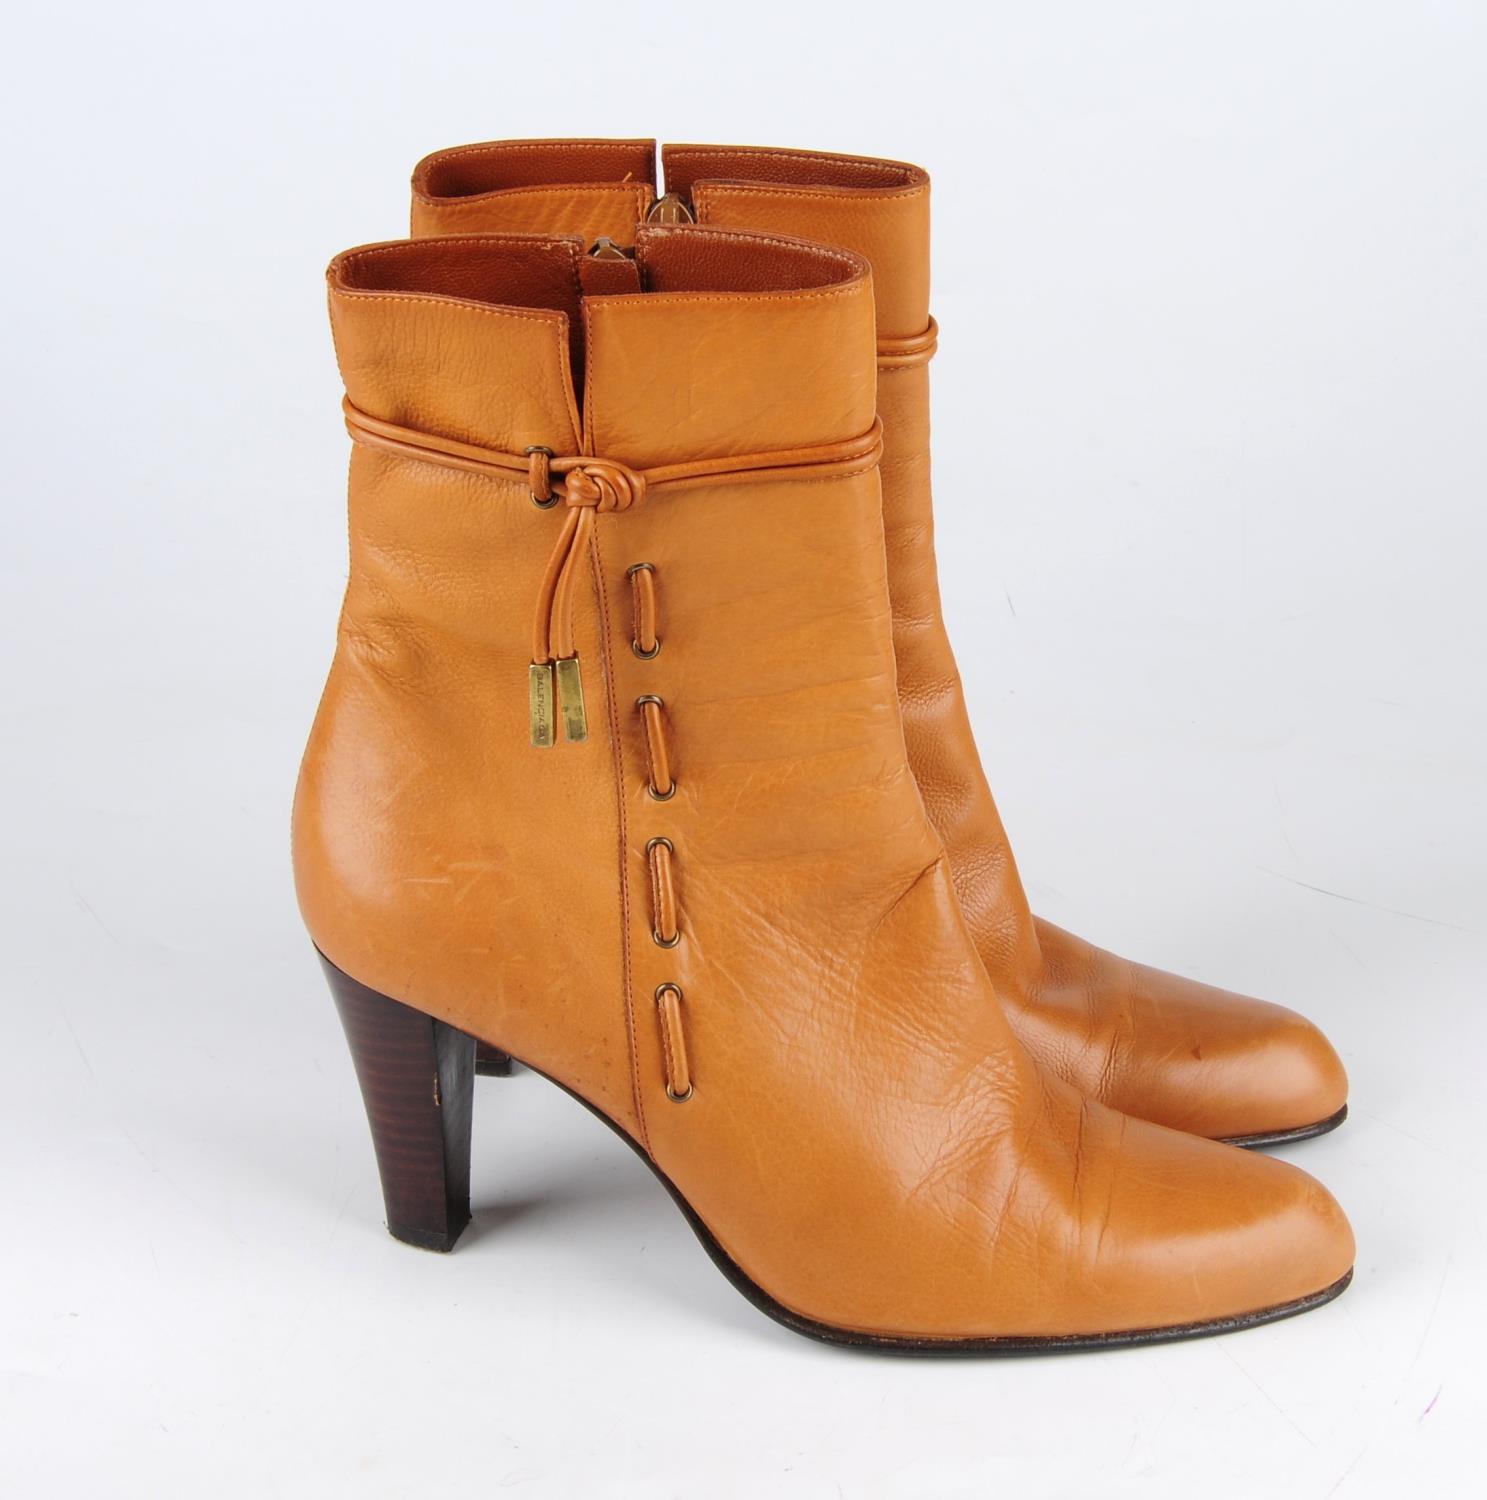 BALENCIAGA - a pair of tan leather ankle boots. - Image 2 of 3